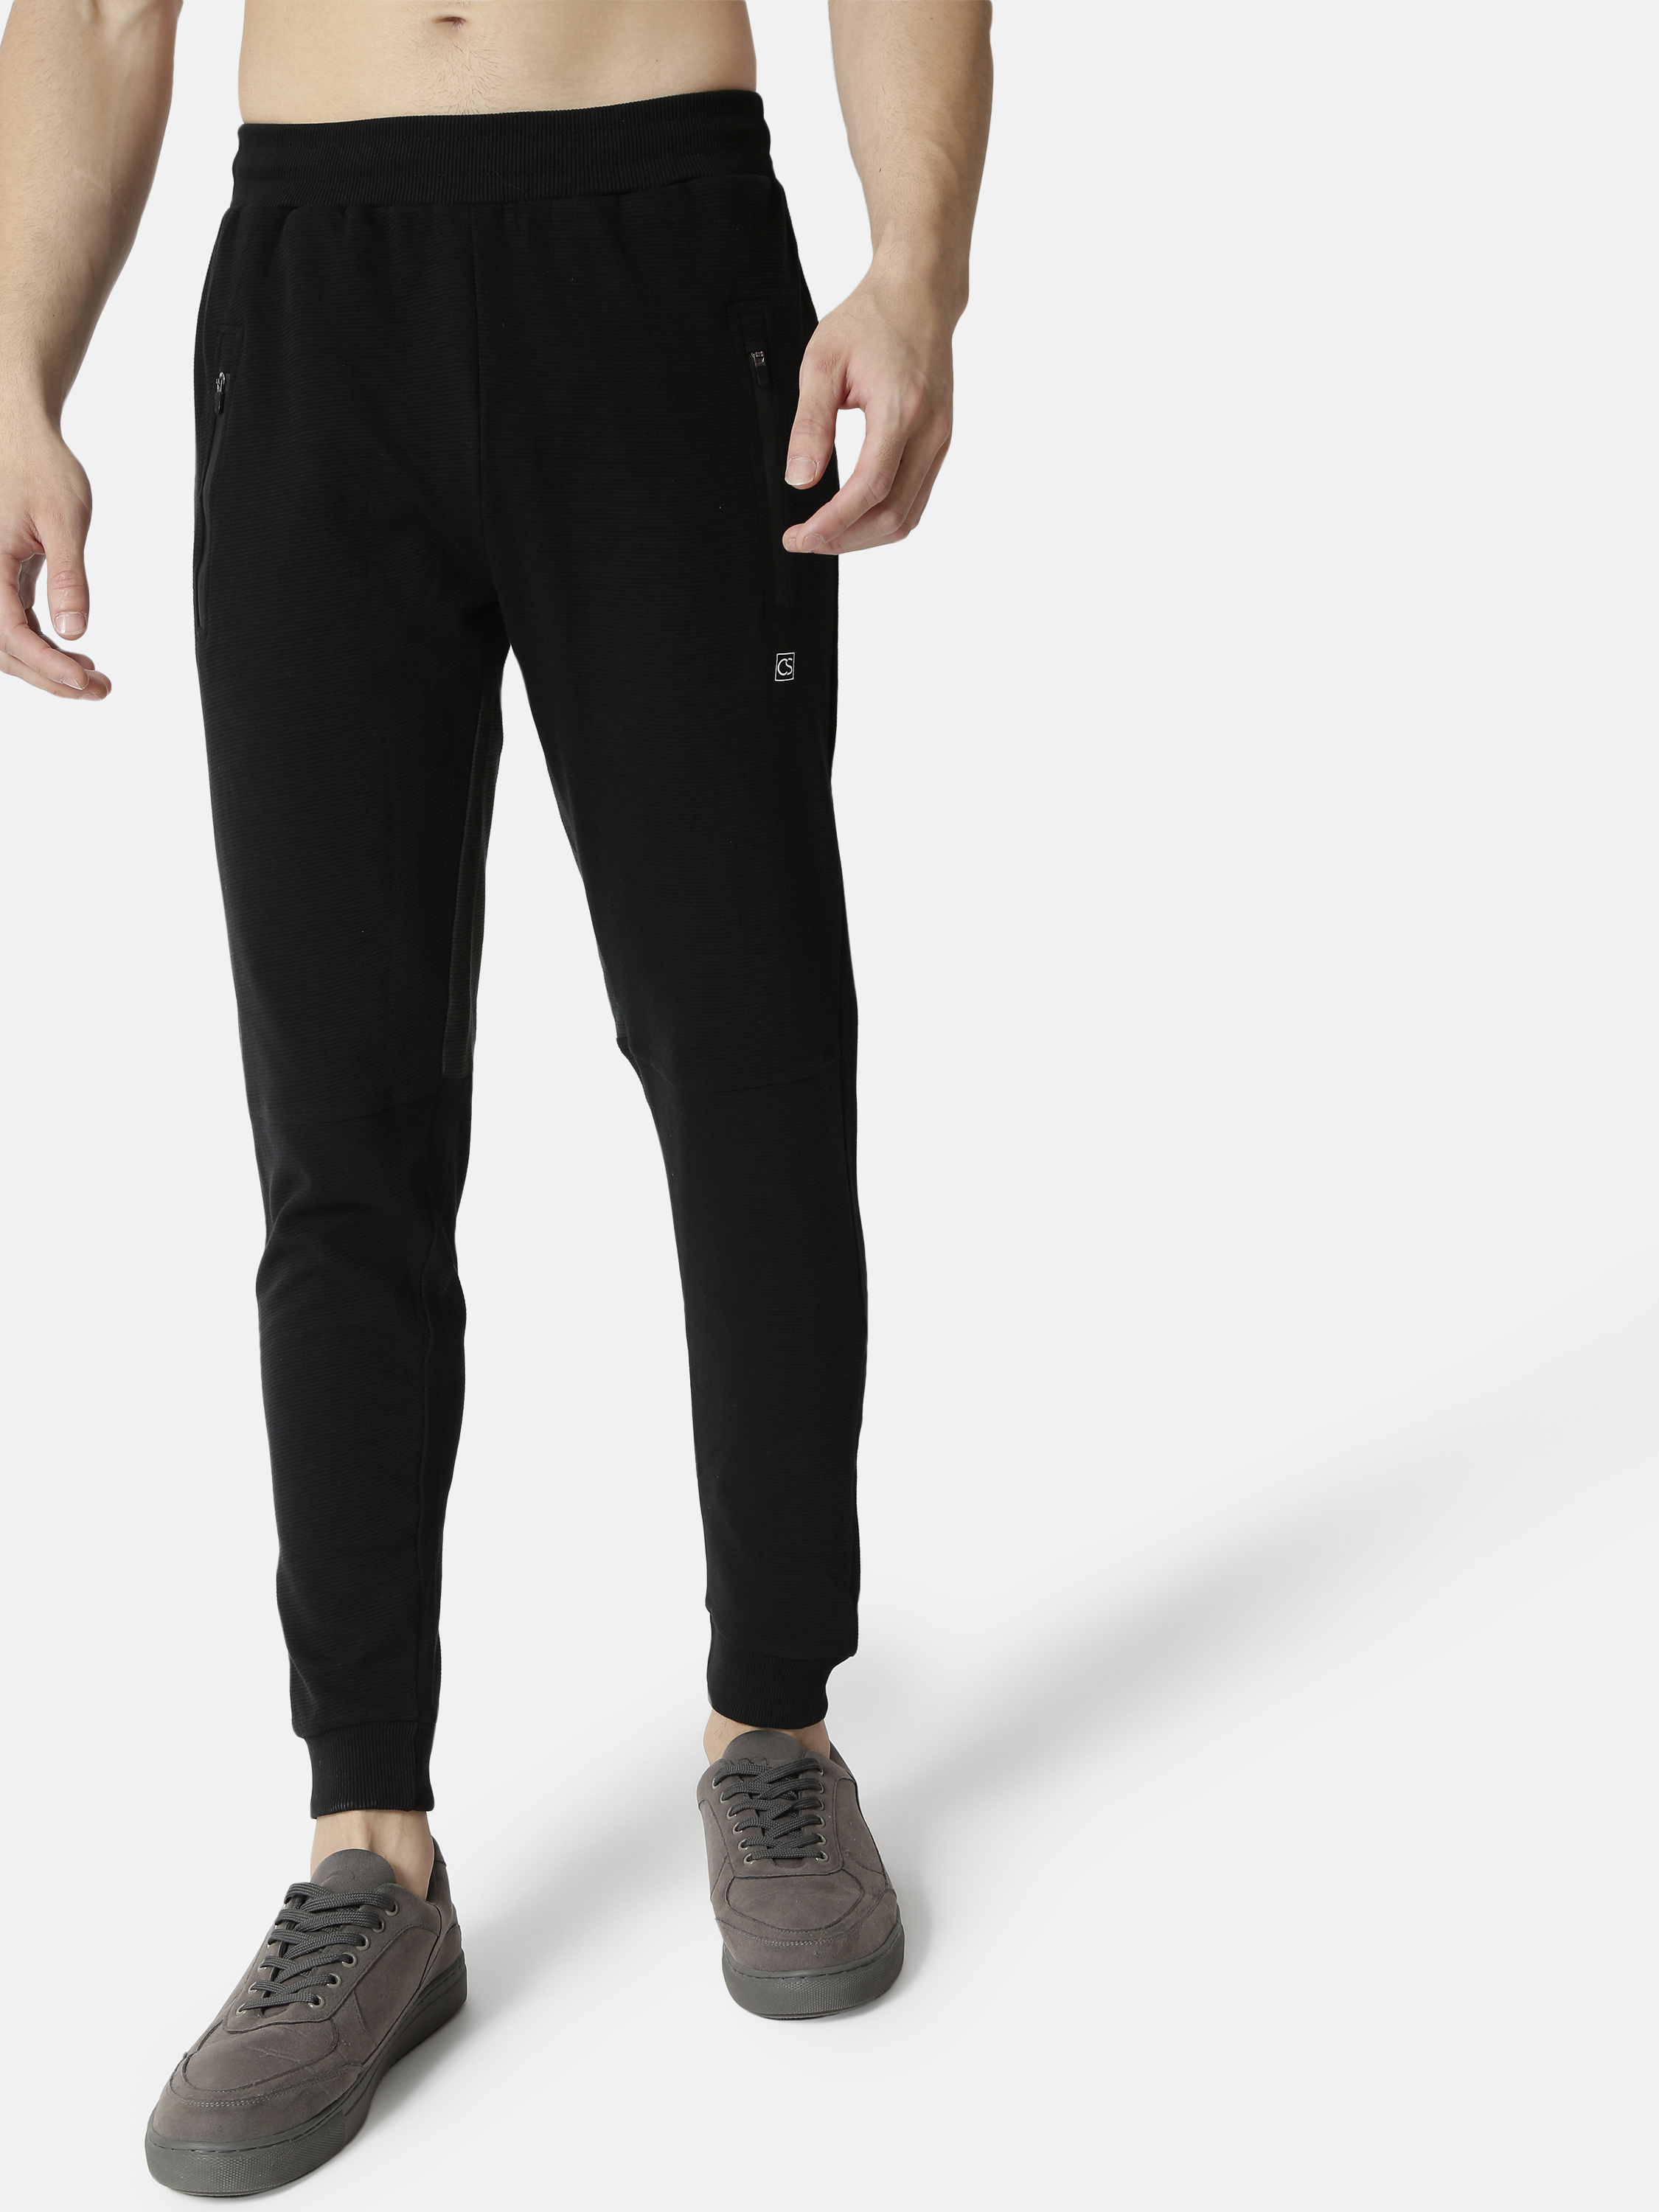 Campus Sutra Men Stylish Casual & Active Trackpant